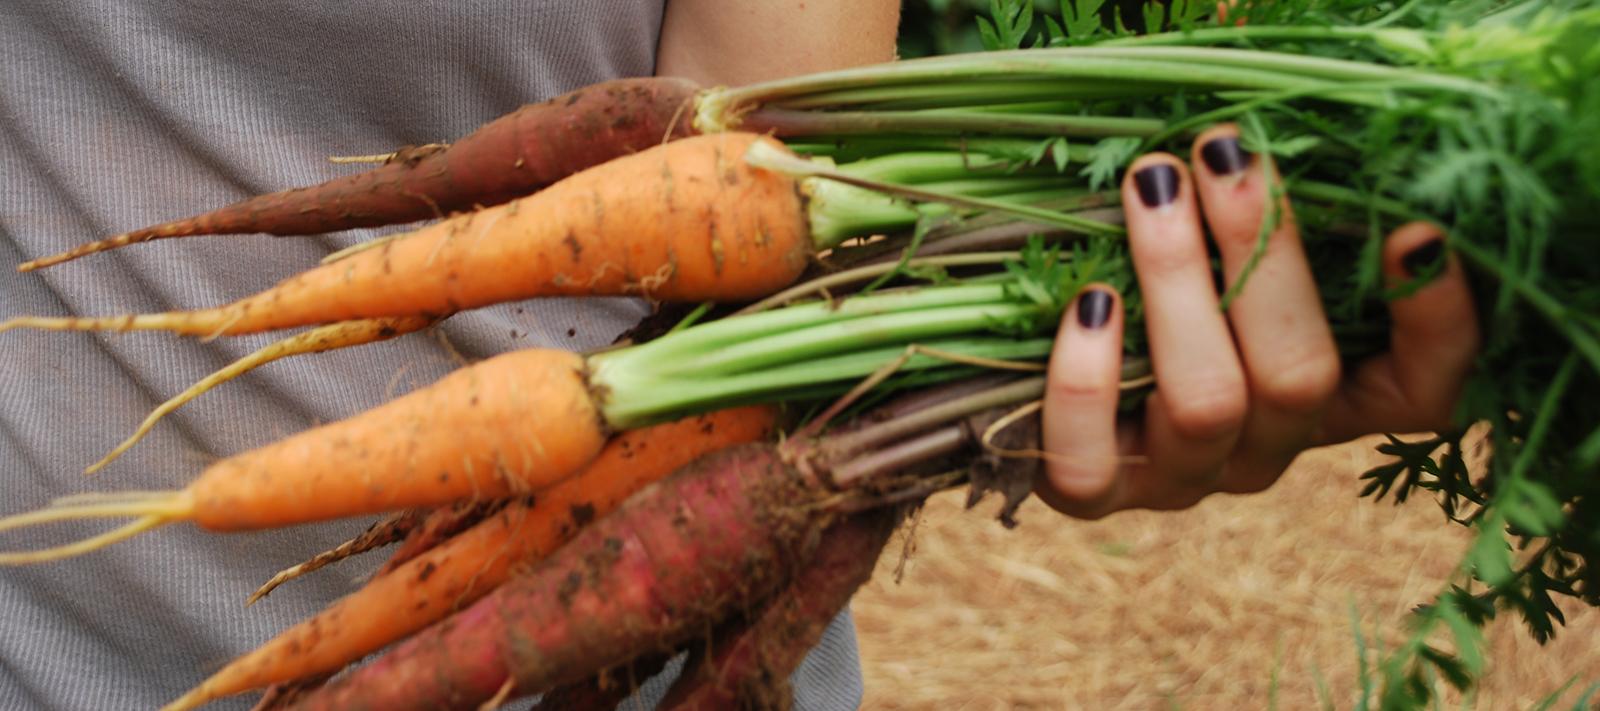 Picture of carrots harvested